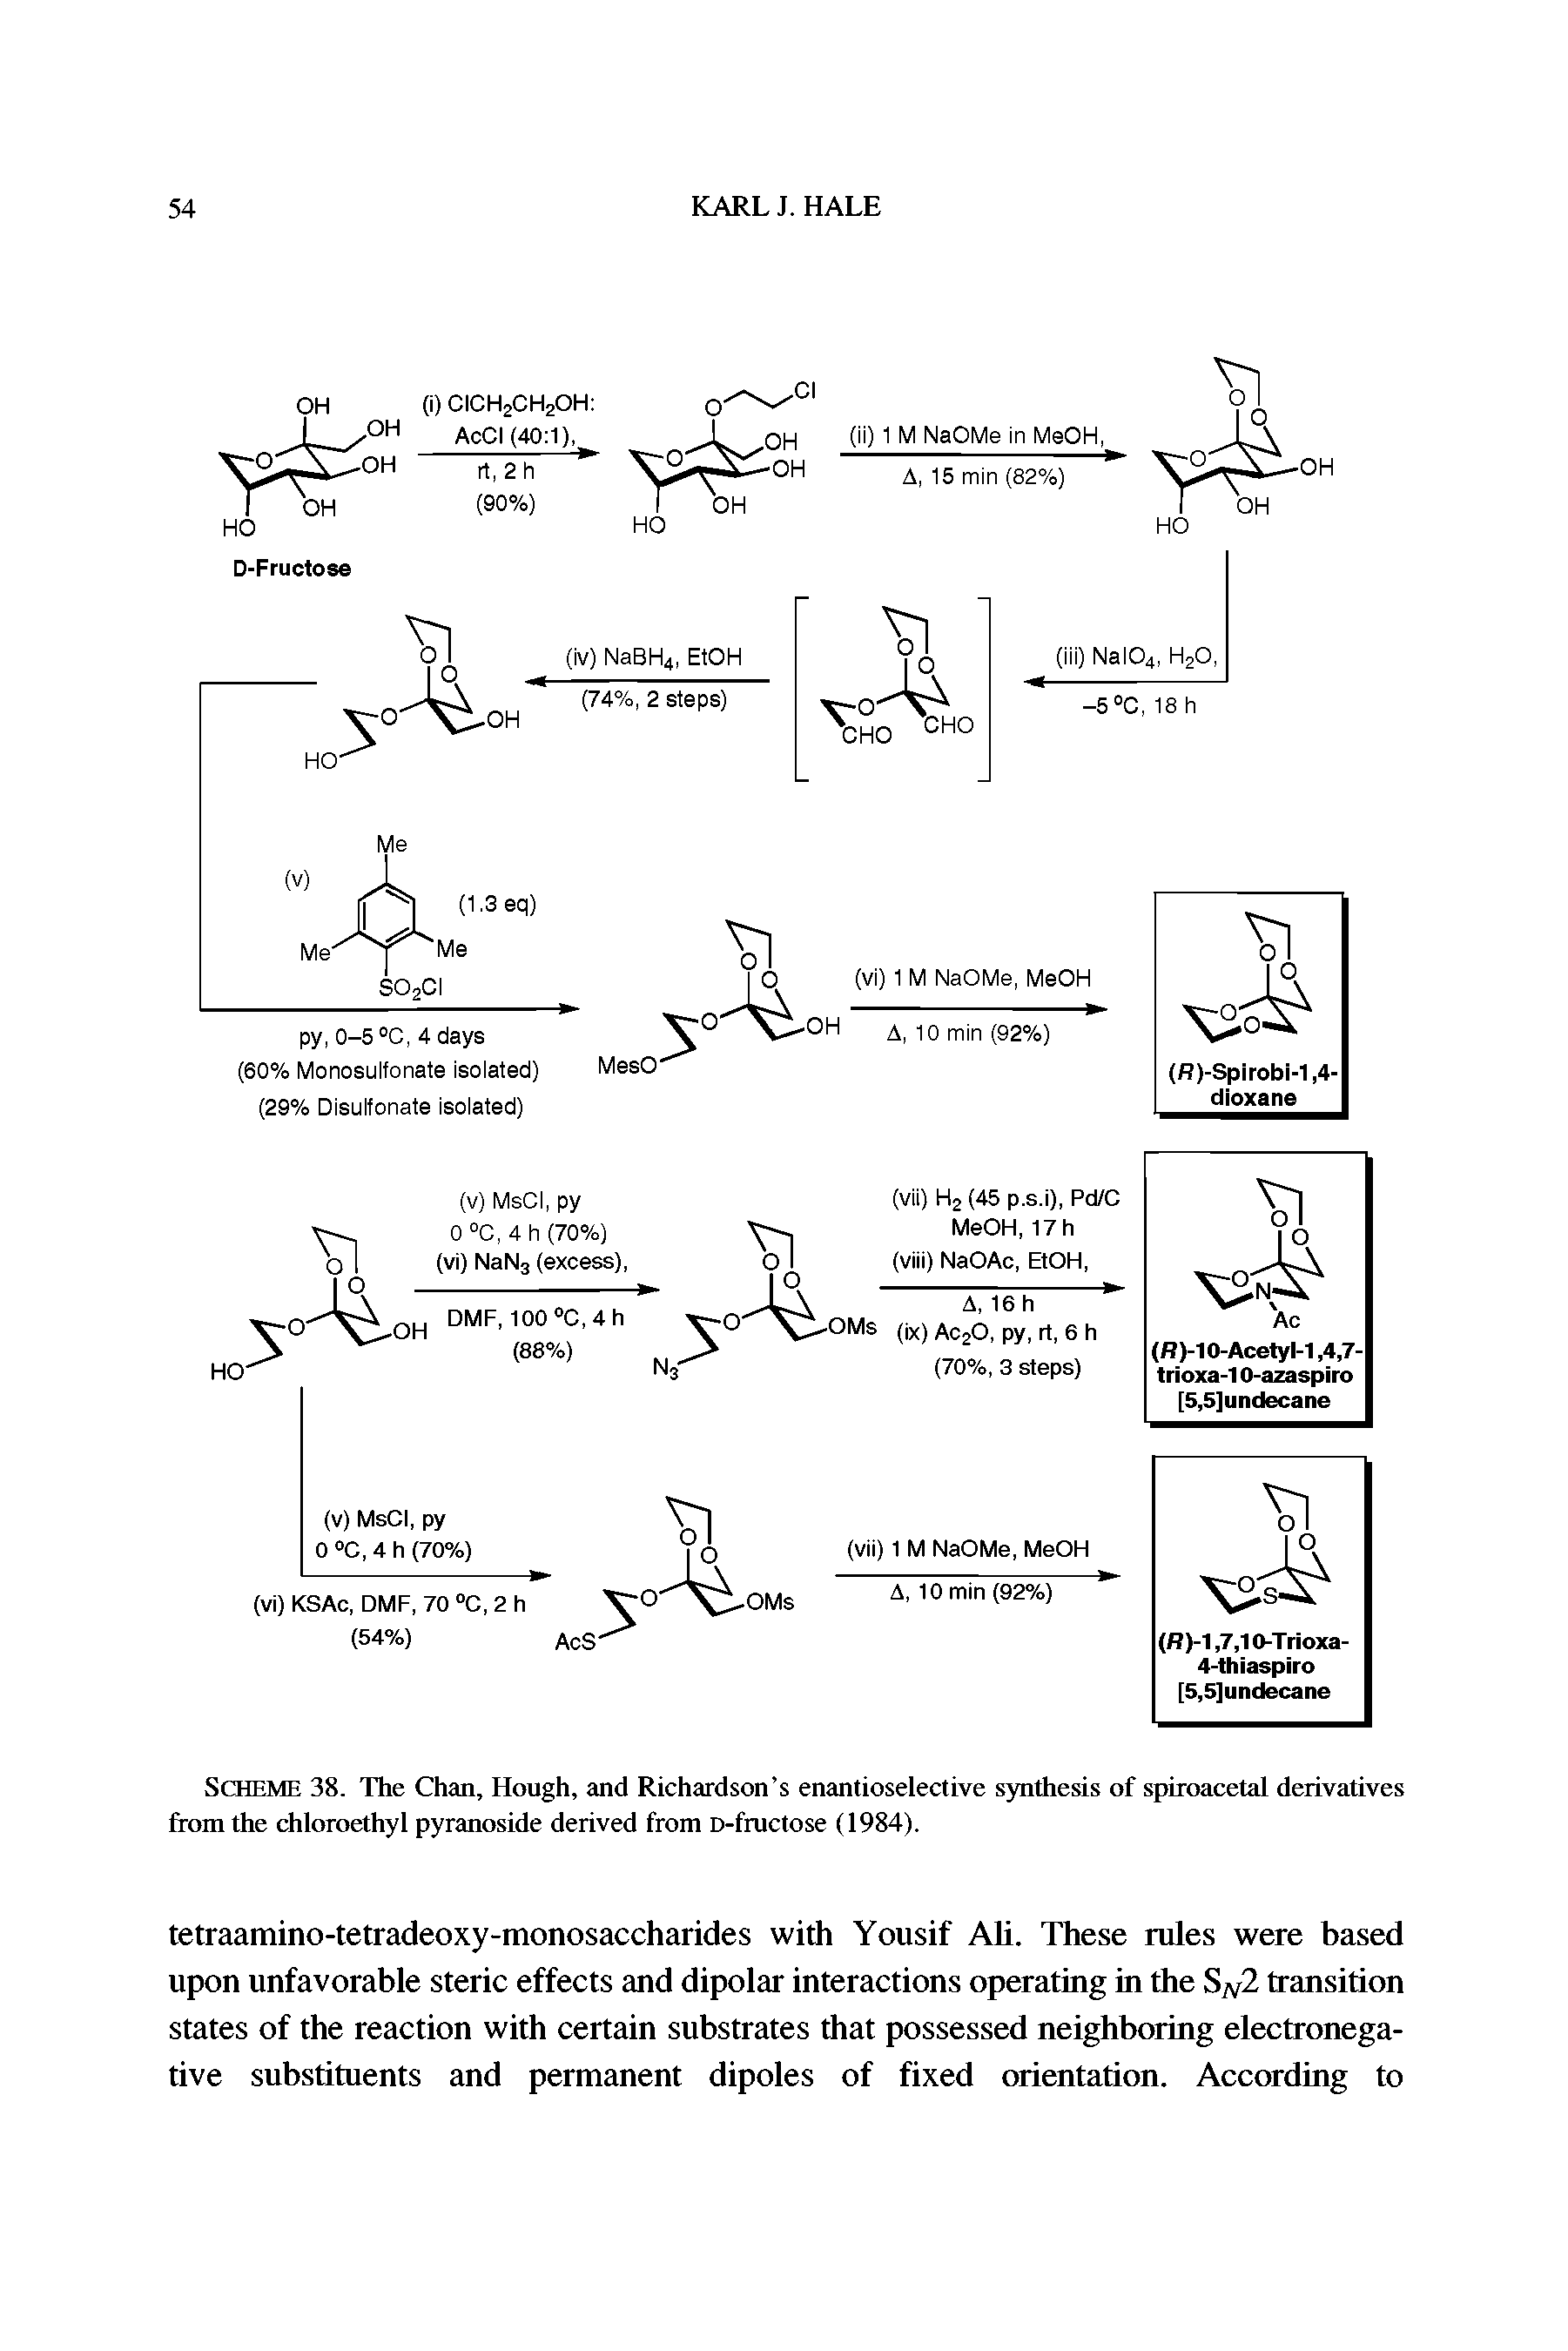 Scheme 38. The Chan, Hough, and Richardson s enantioselective synthesis of spiroacetal derivatives from the chloroethyl pyranoside derived from D-fructose (1984).